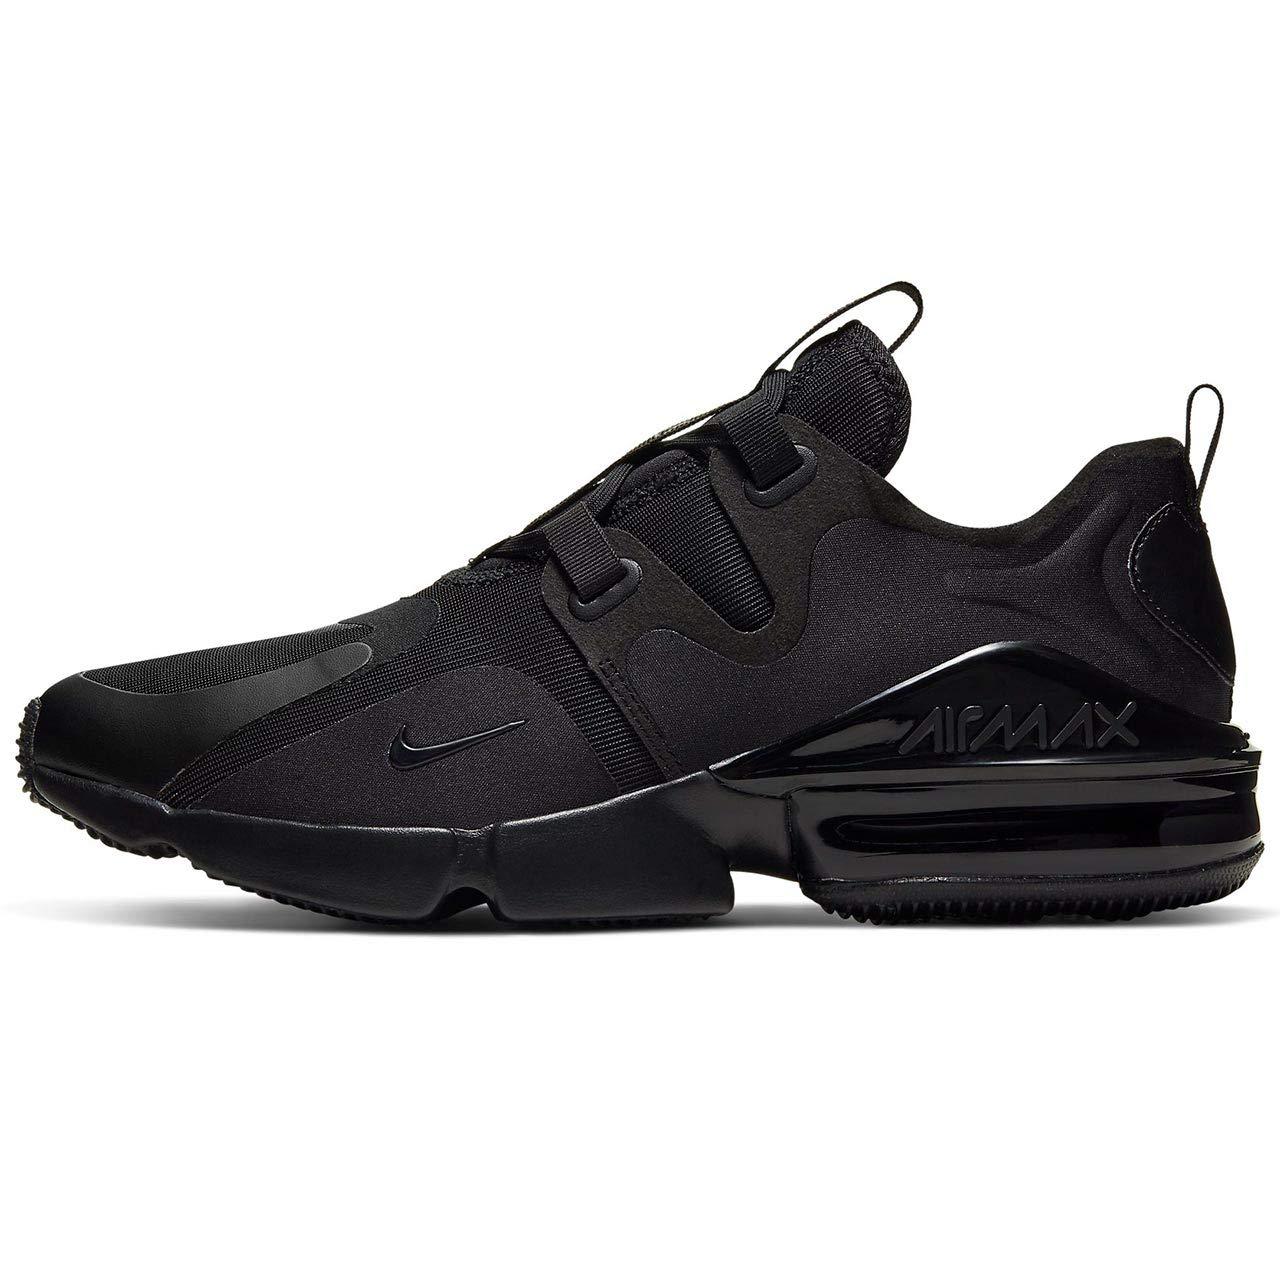 Nike Synthetic Air Max Infinity Shoe in Black Black (Black) for Men - Save  61% | Lyst UK